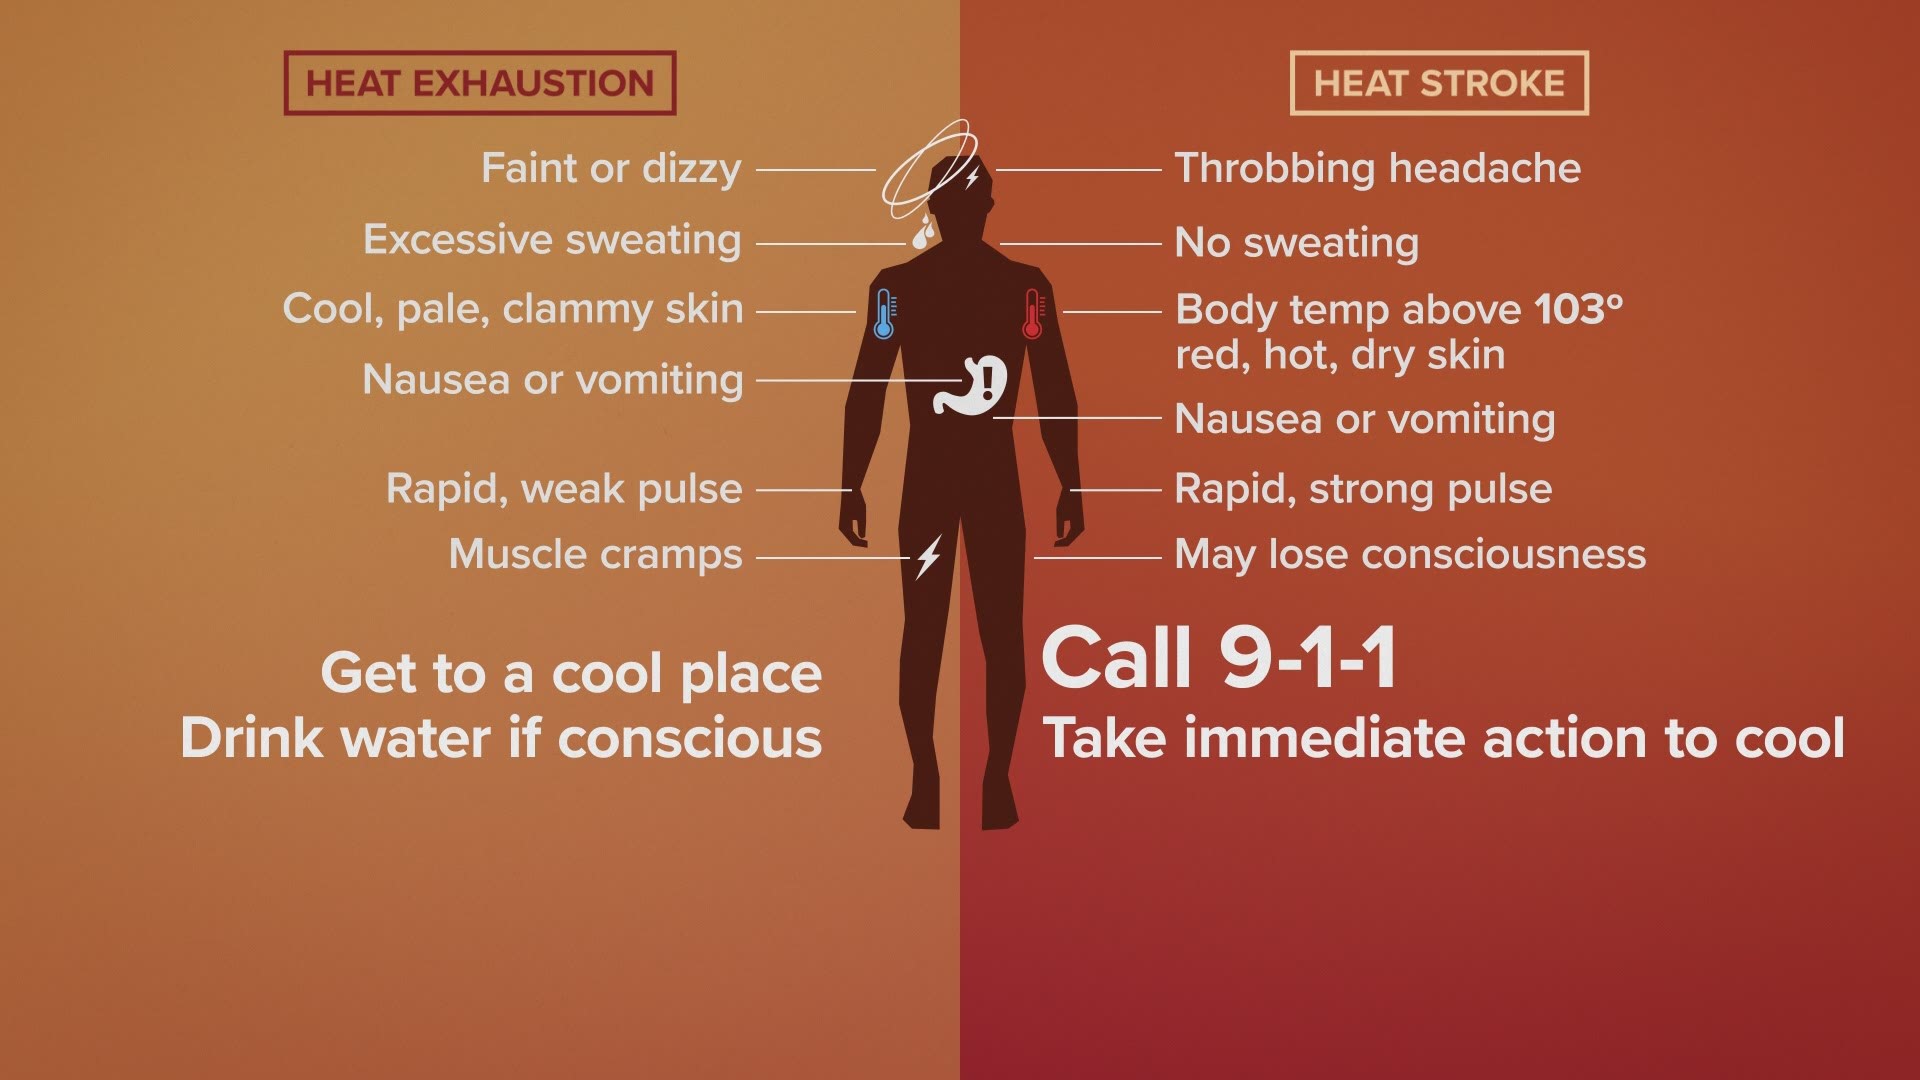 How to know the difference between heat exhaustion vs. heat stroke